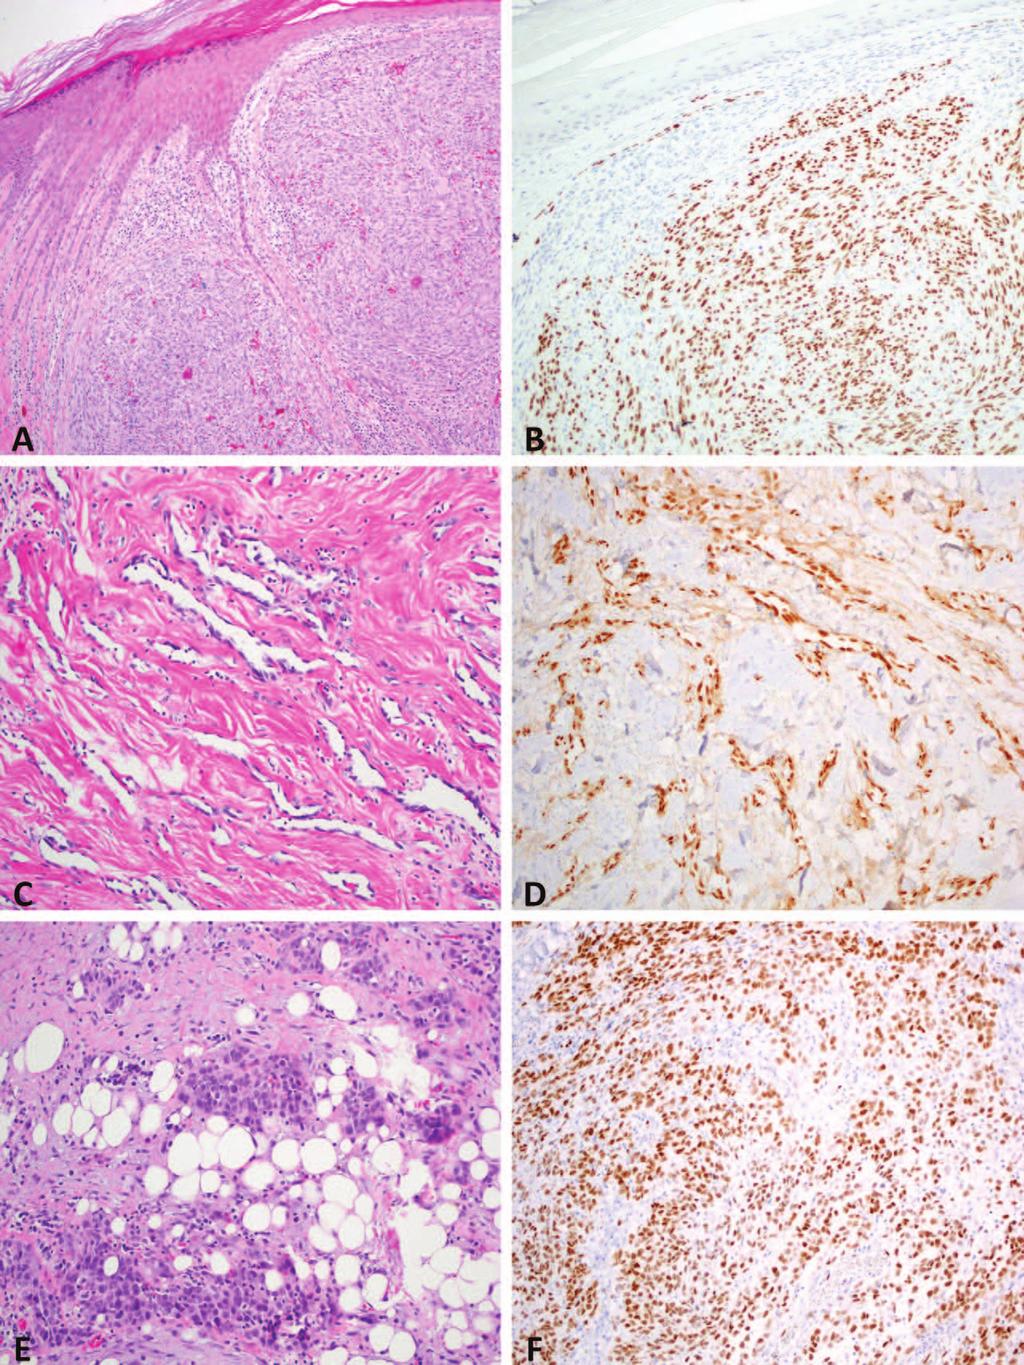 Figure 1. Nodular Kaposi sarcoma involving dermis composed of fascicles of spindle cells with numerous extravasated red blood cells (A). The tumor cells show diffuse nuclear expression of ERG (B).